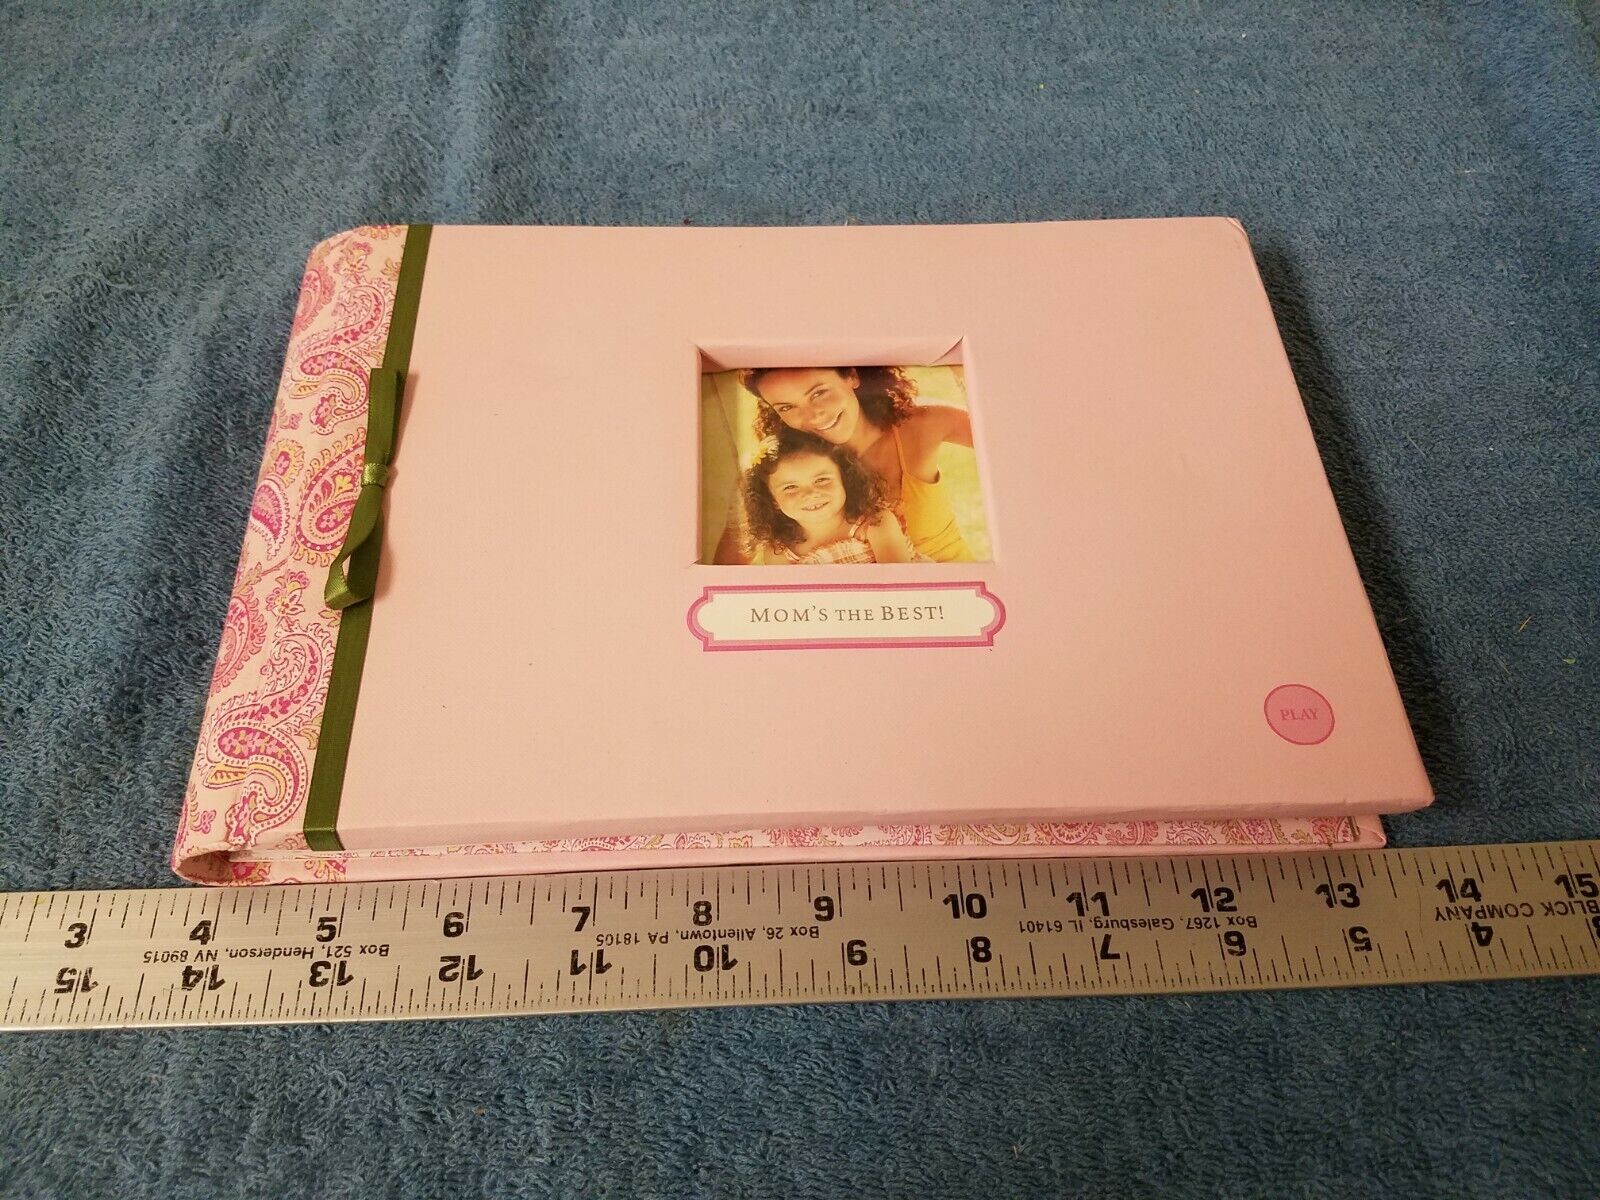 Primary image for Hallmark Pink Recordable Mom's the Best! Photo Album NWT